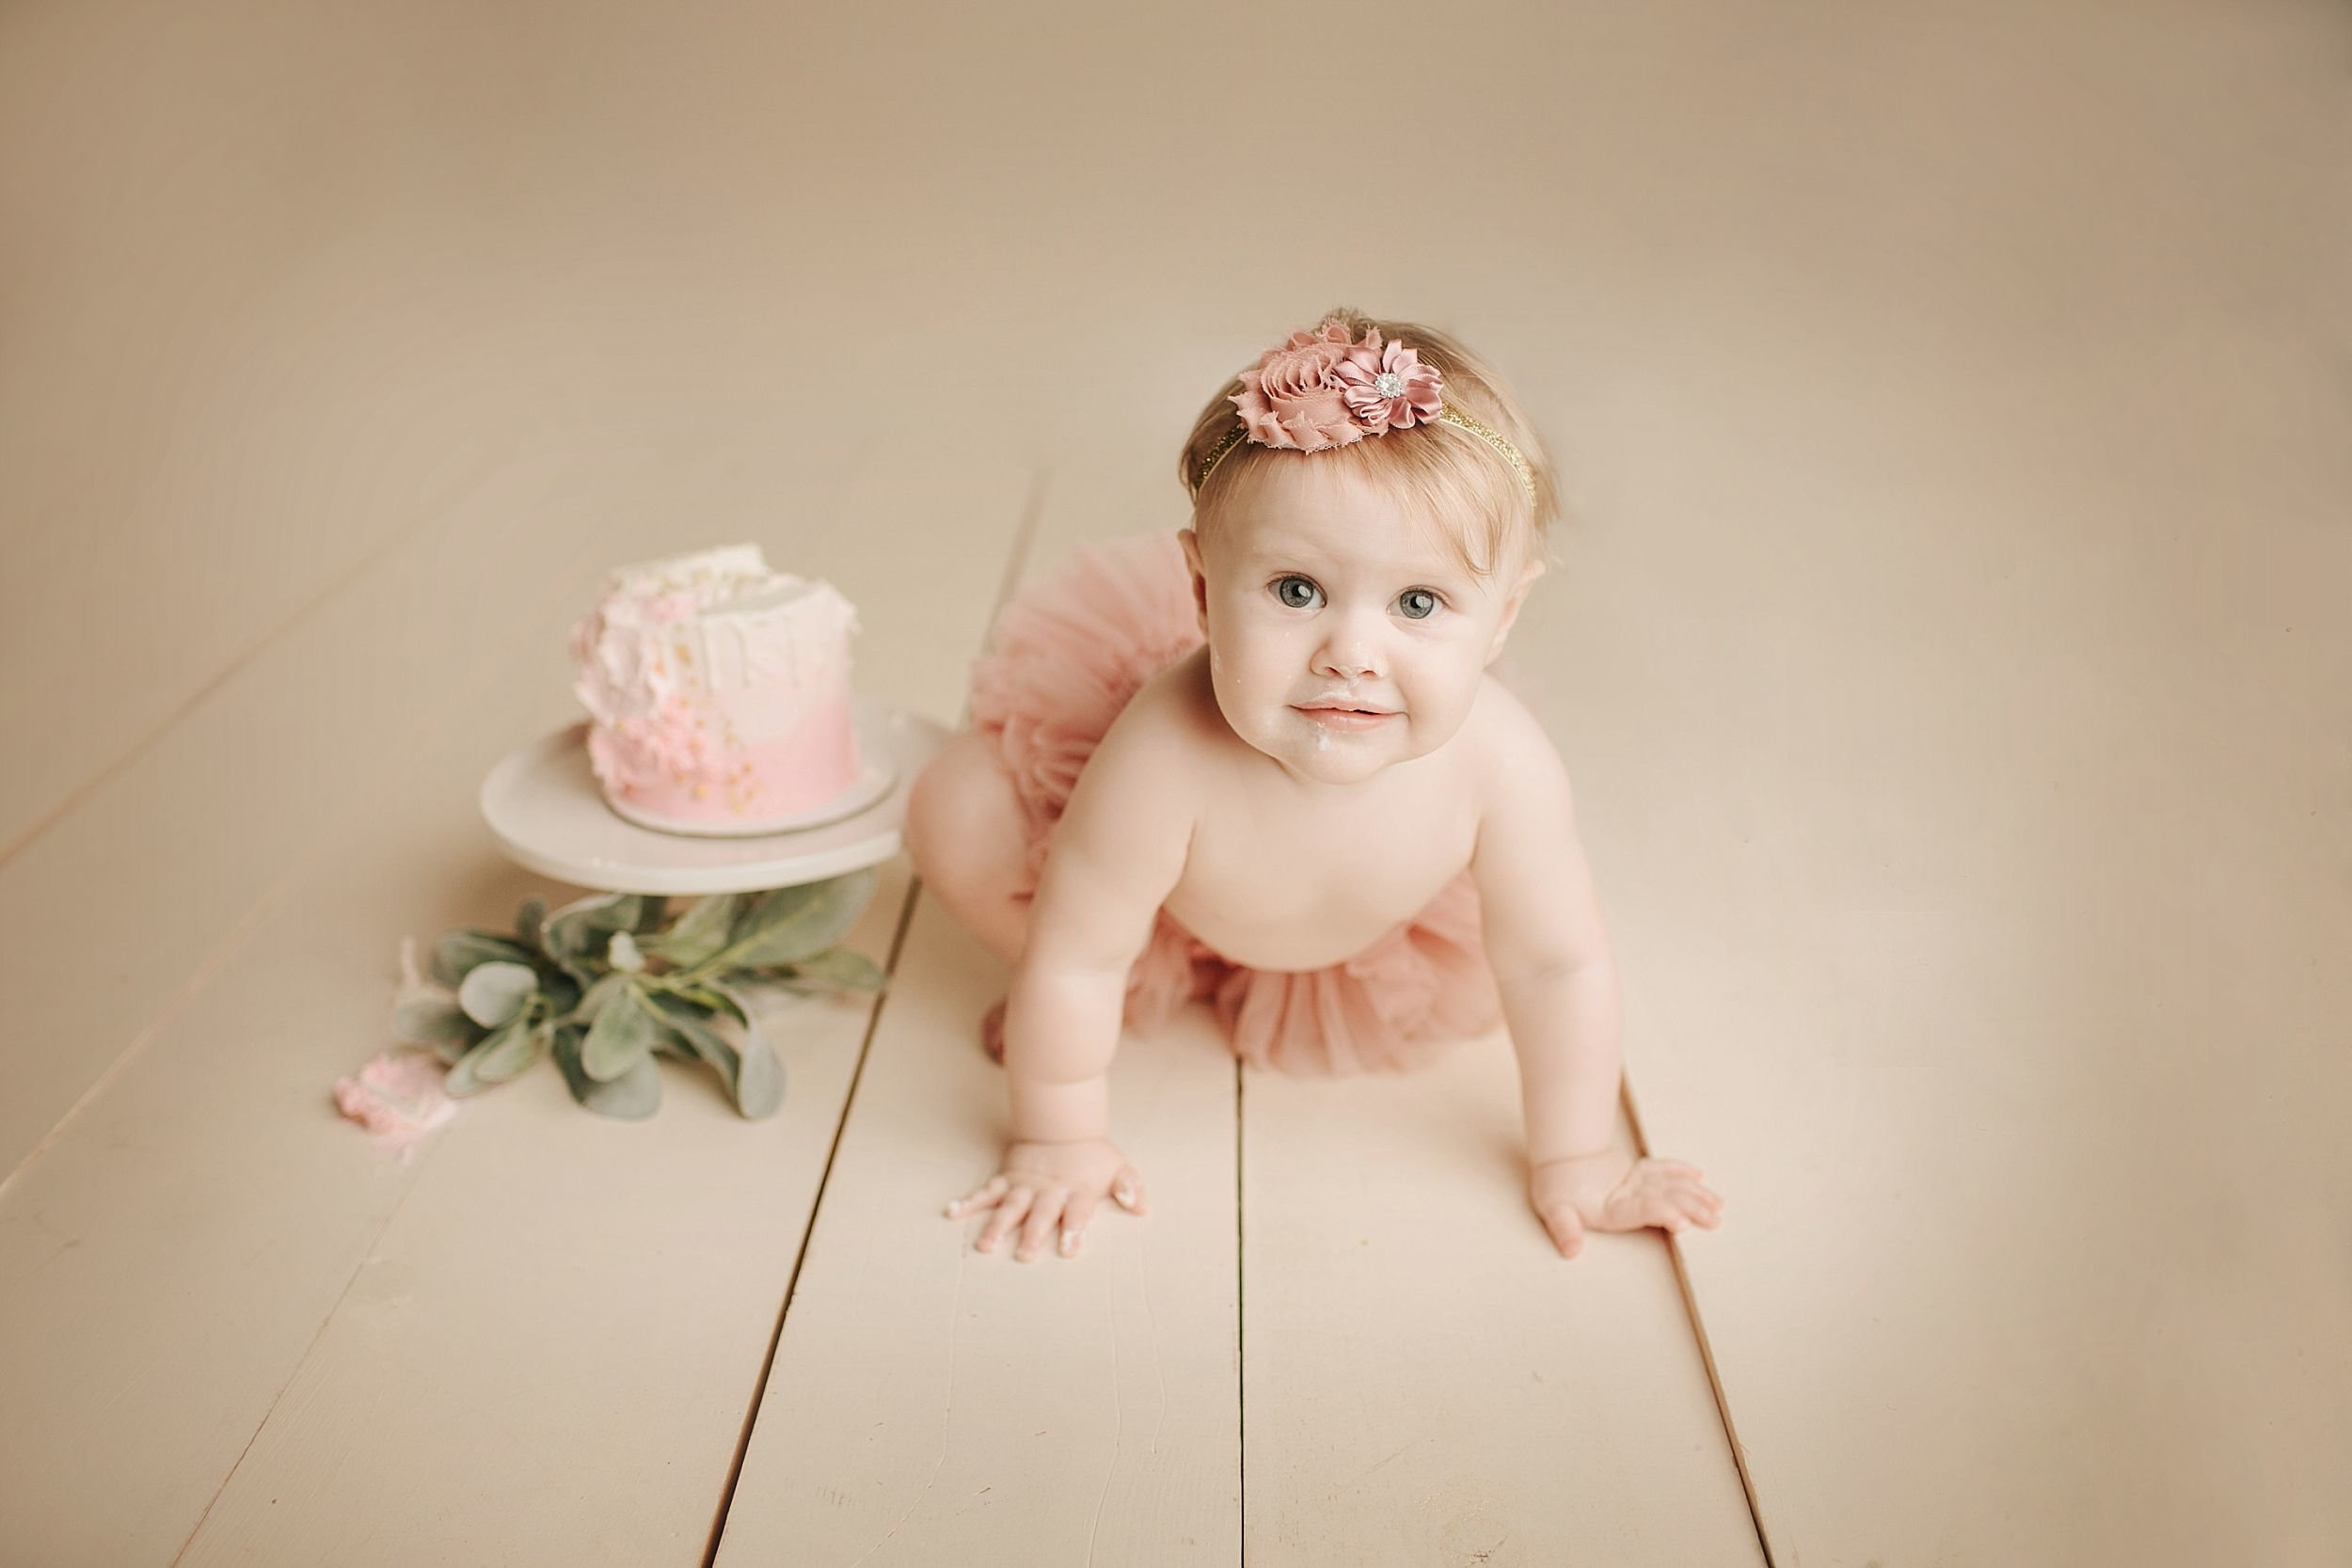 Baby sitting beside a messy cake during cake smash session.